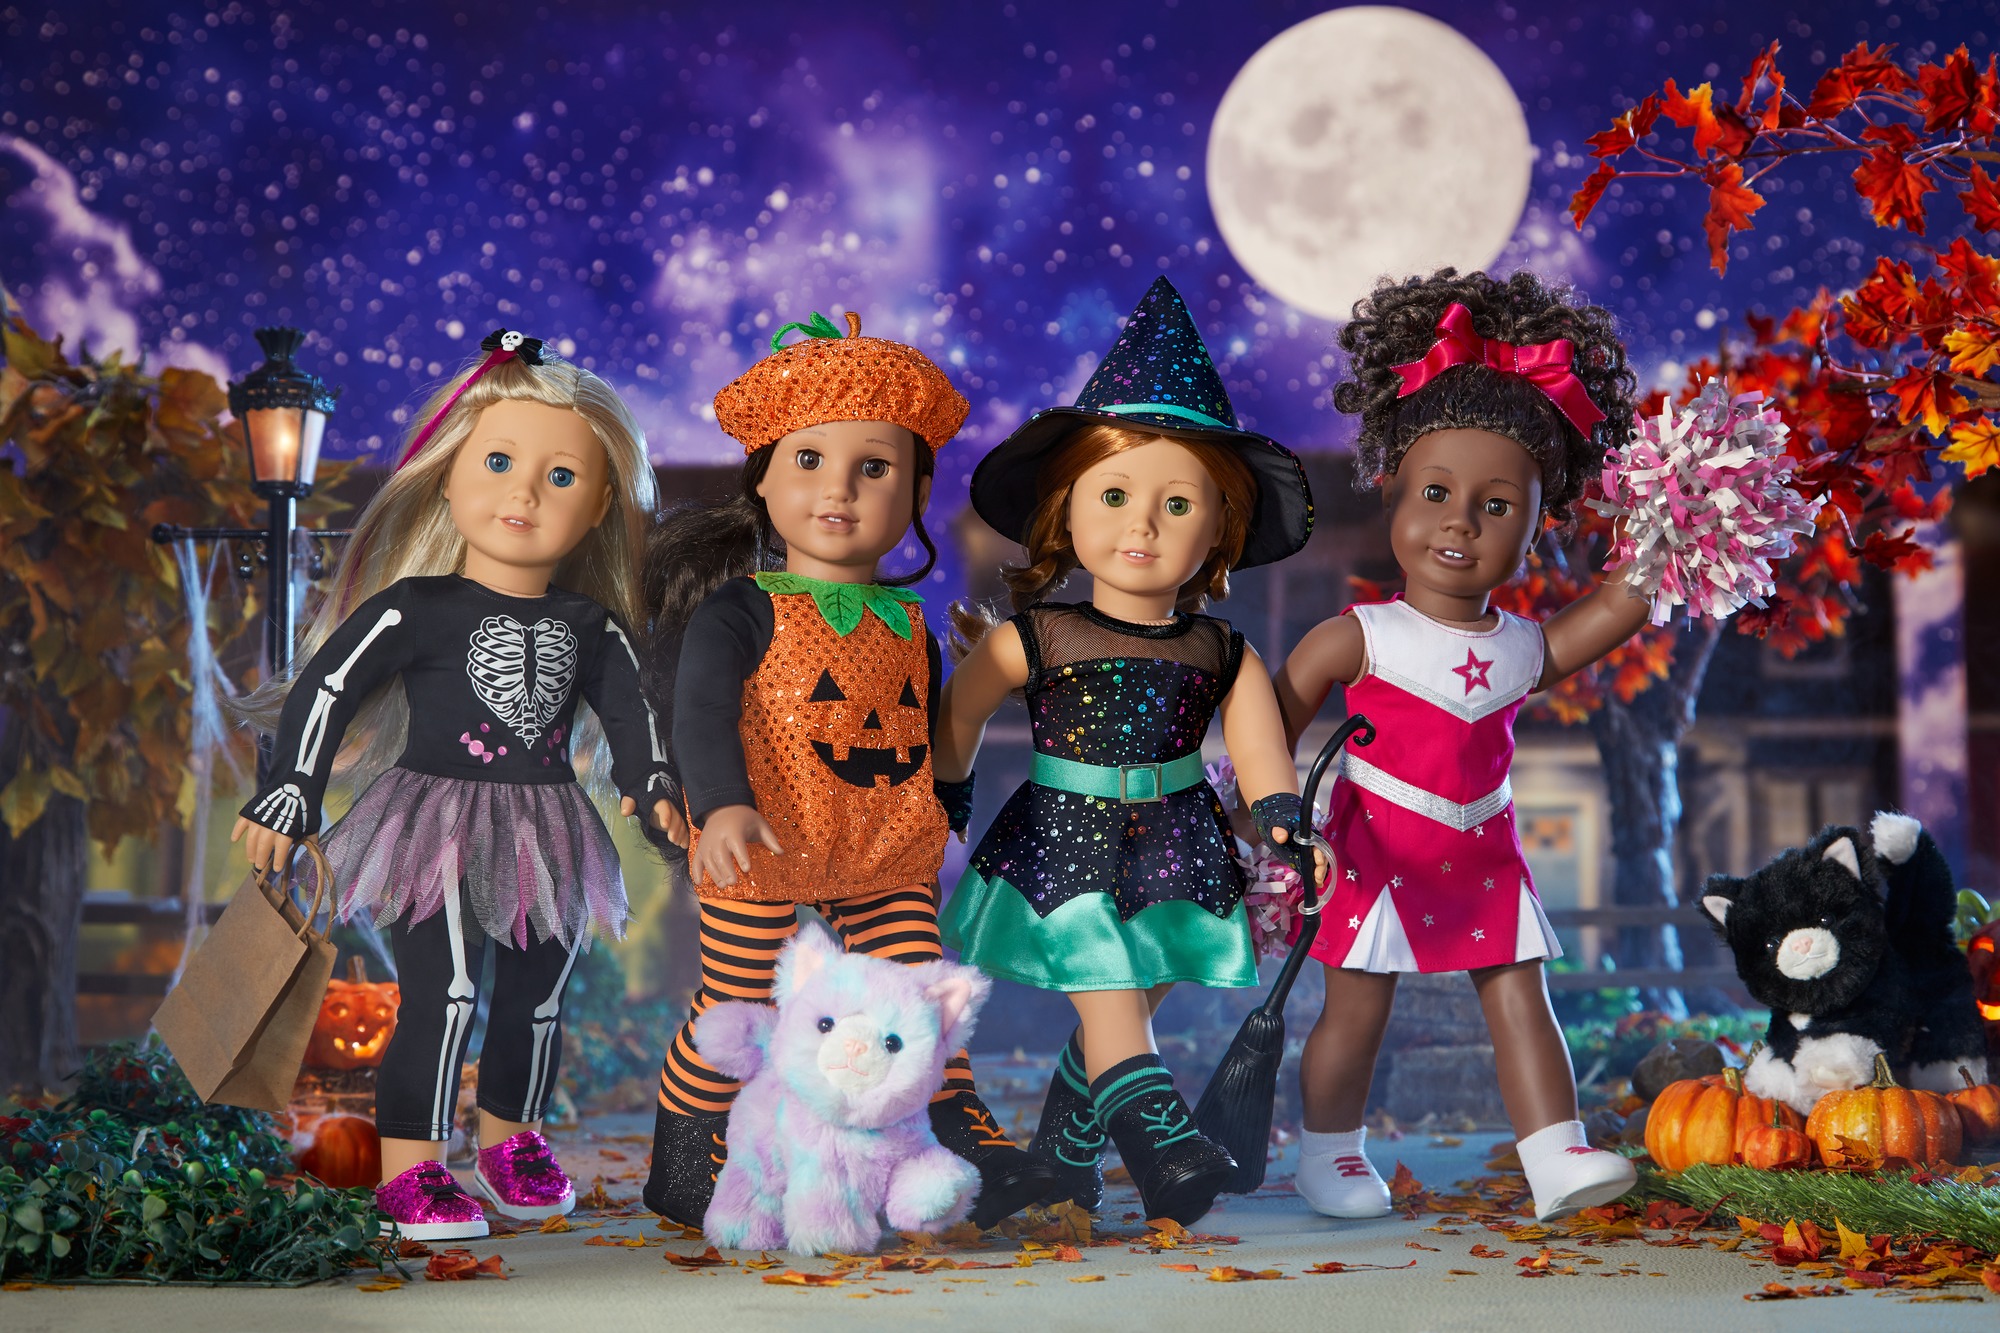 American Girl Dolls dressed up in Halloween costumes.